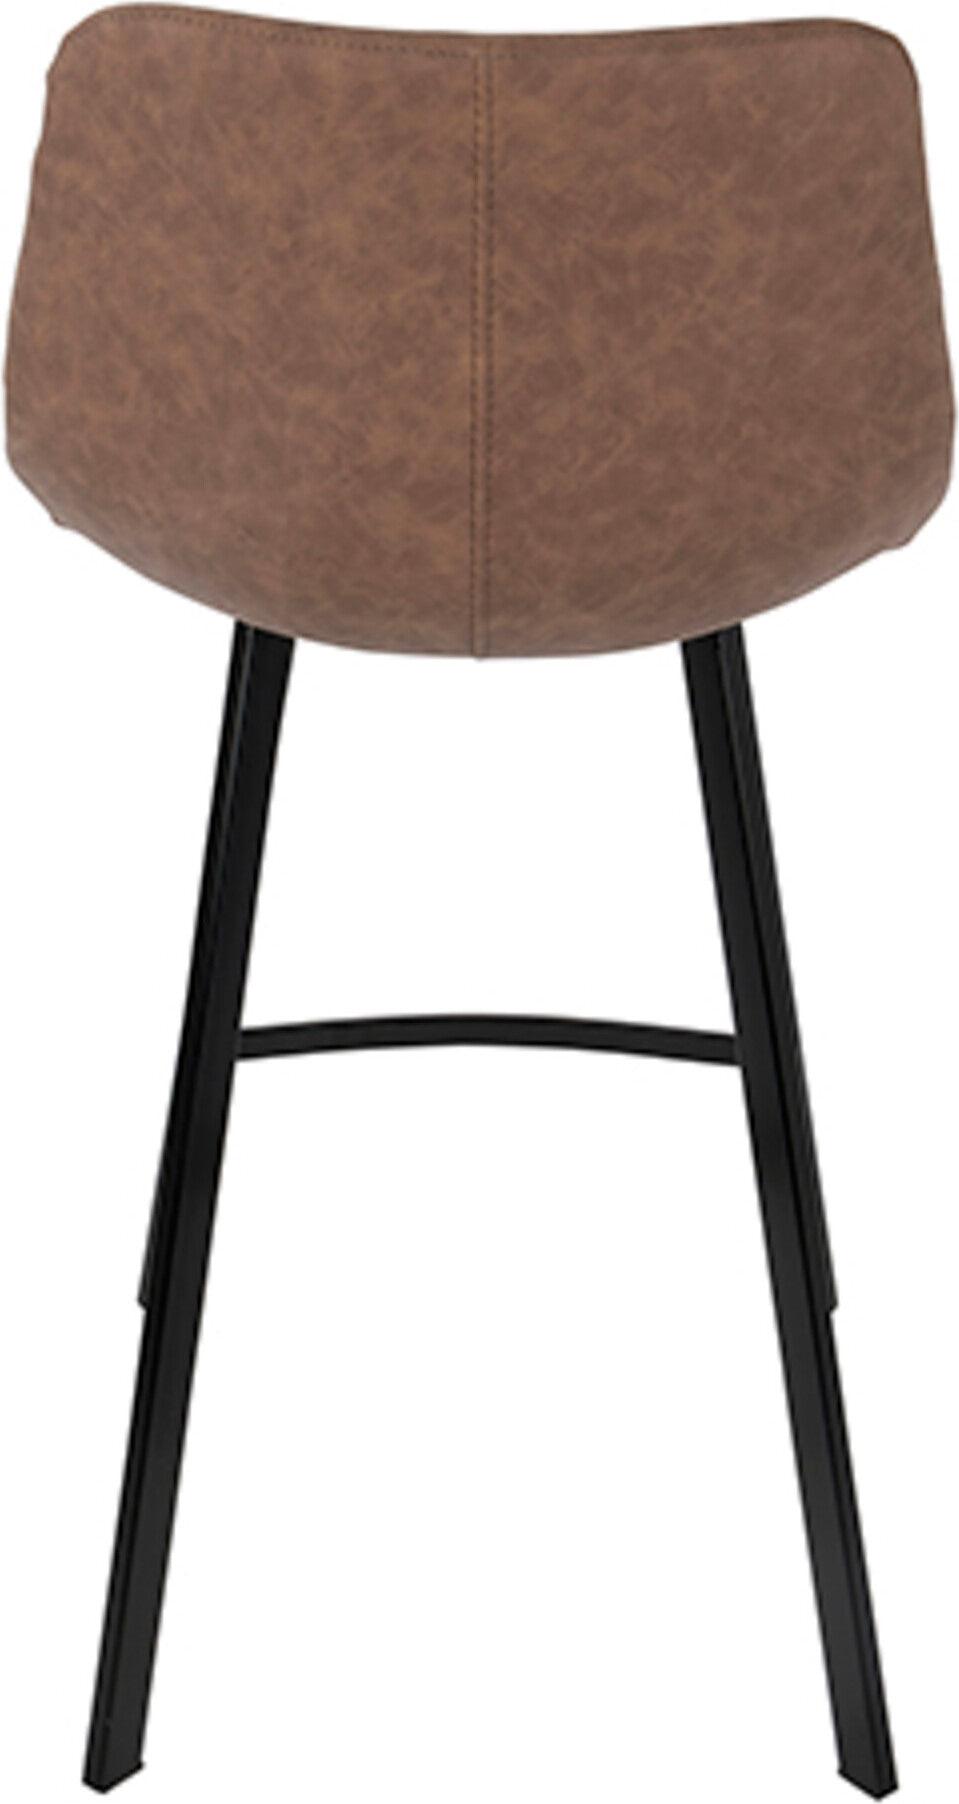 Lumisource Barstools - Outlaw Counter Stool Brown & Black Legs (Set of 2)